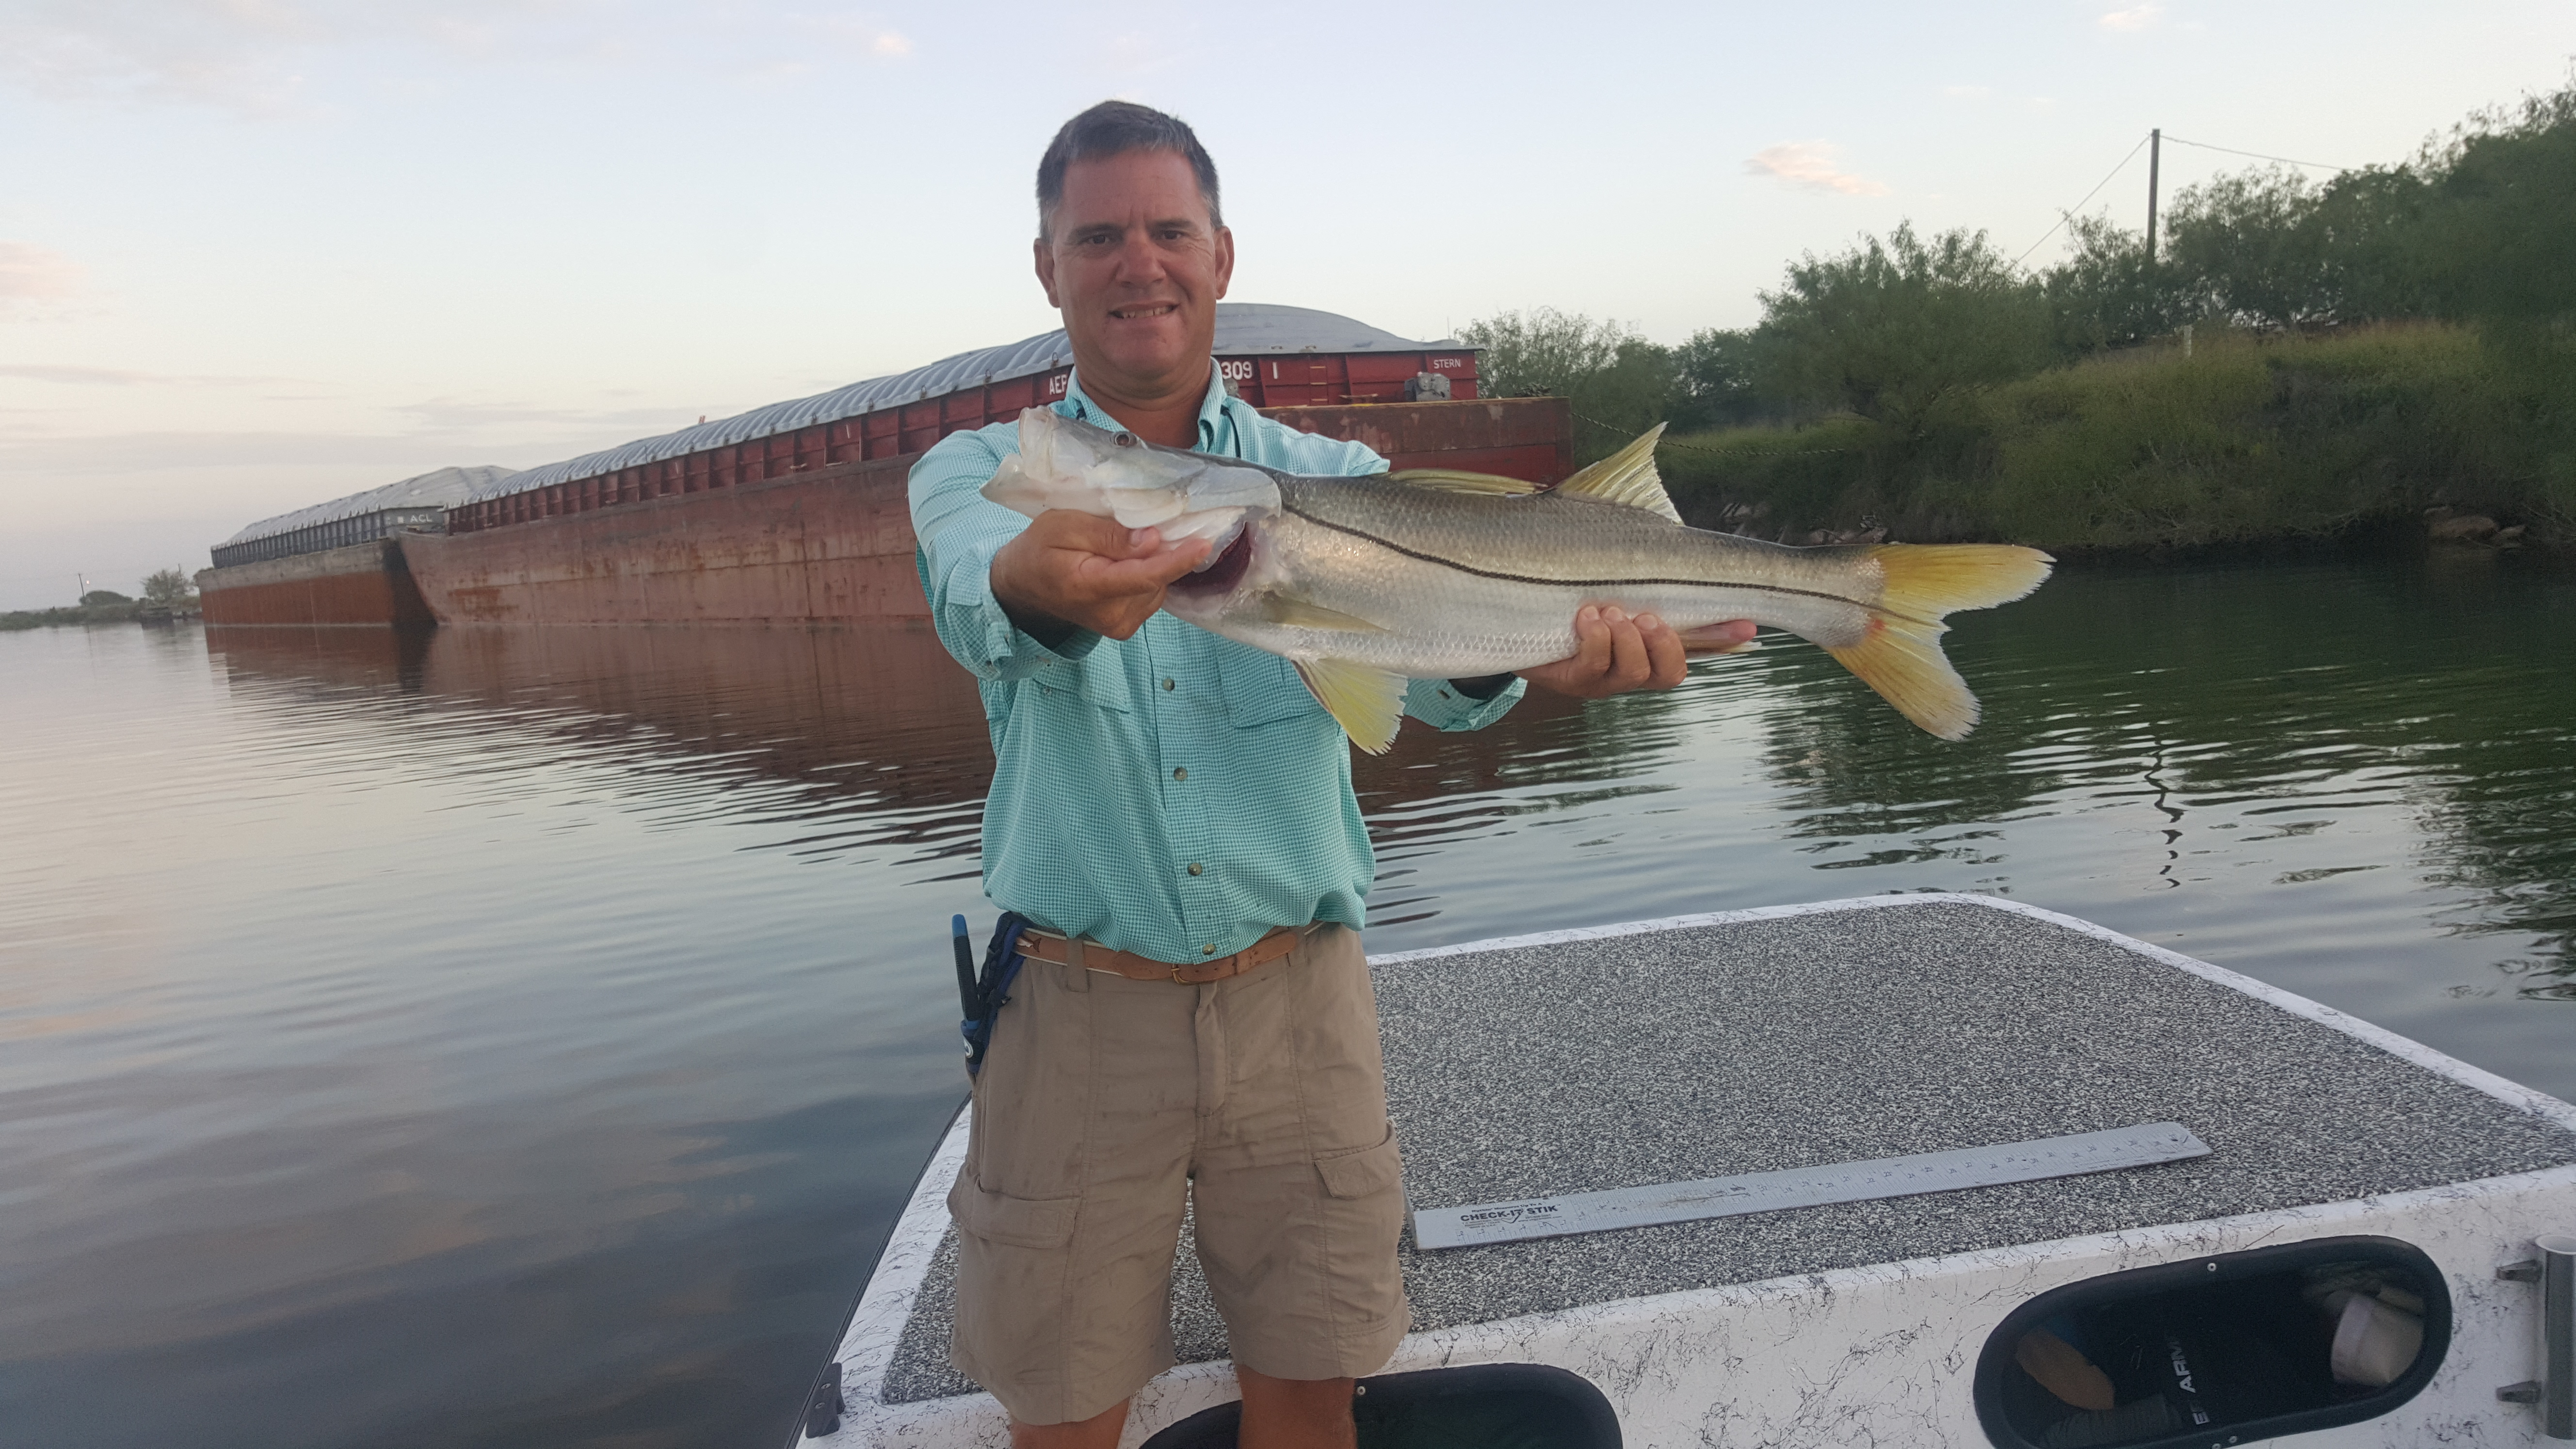 Snook in South Padre Island, TX